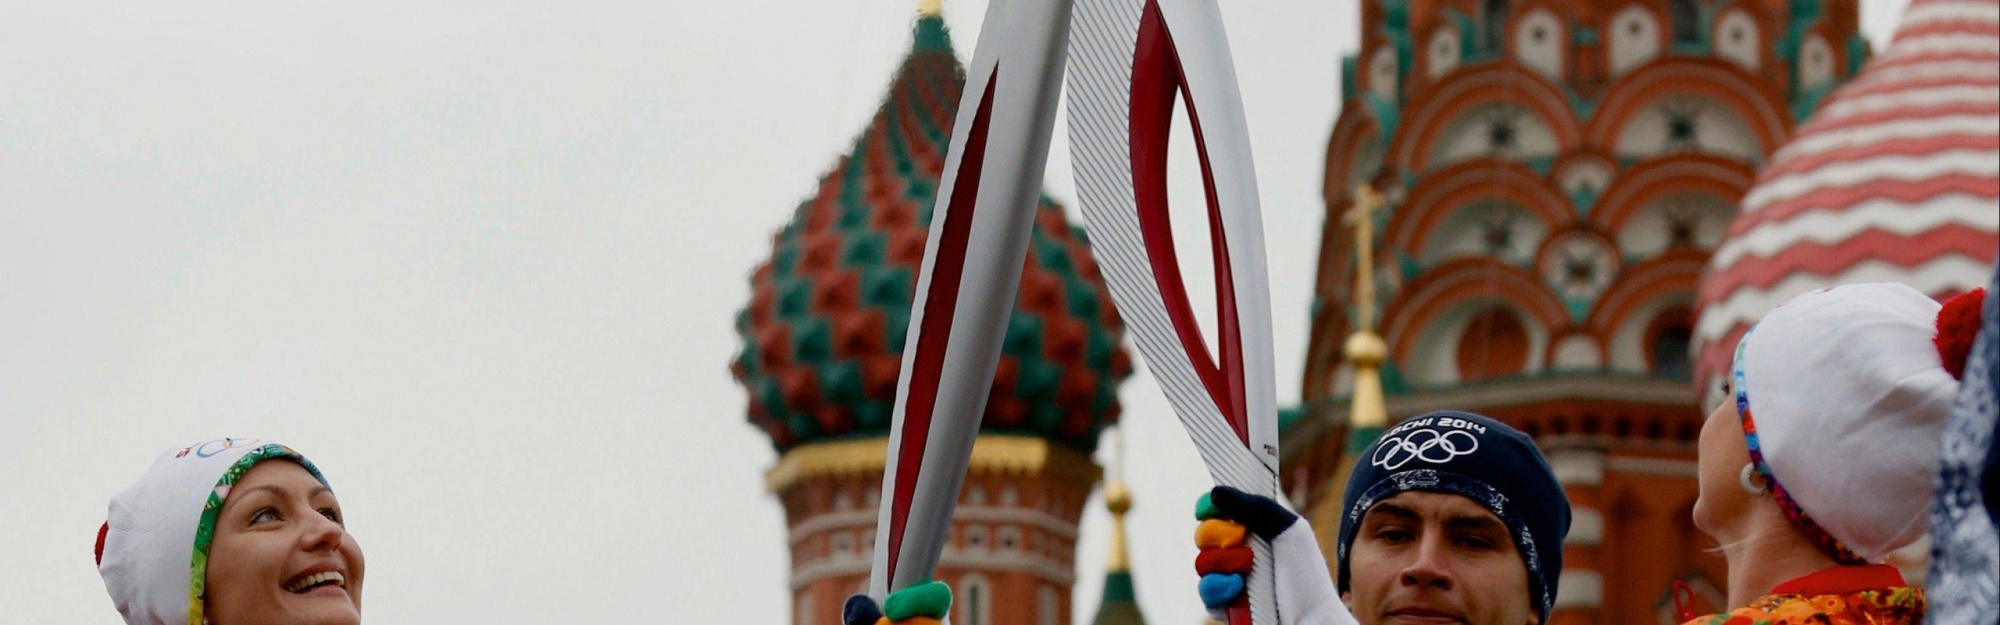 Olympic Flame On Red Square - Sochi